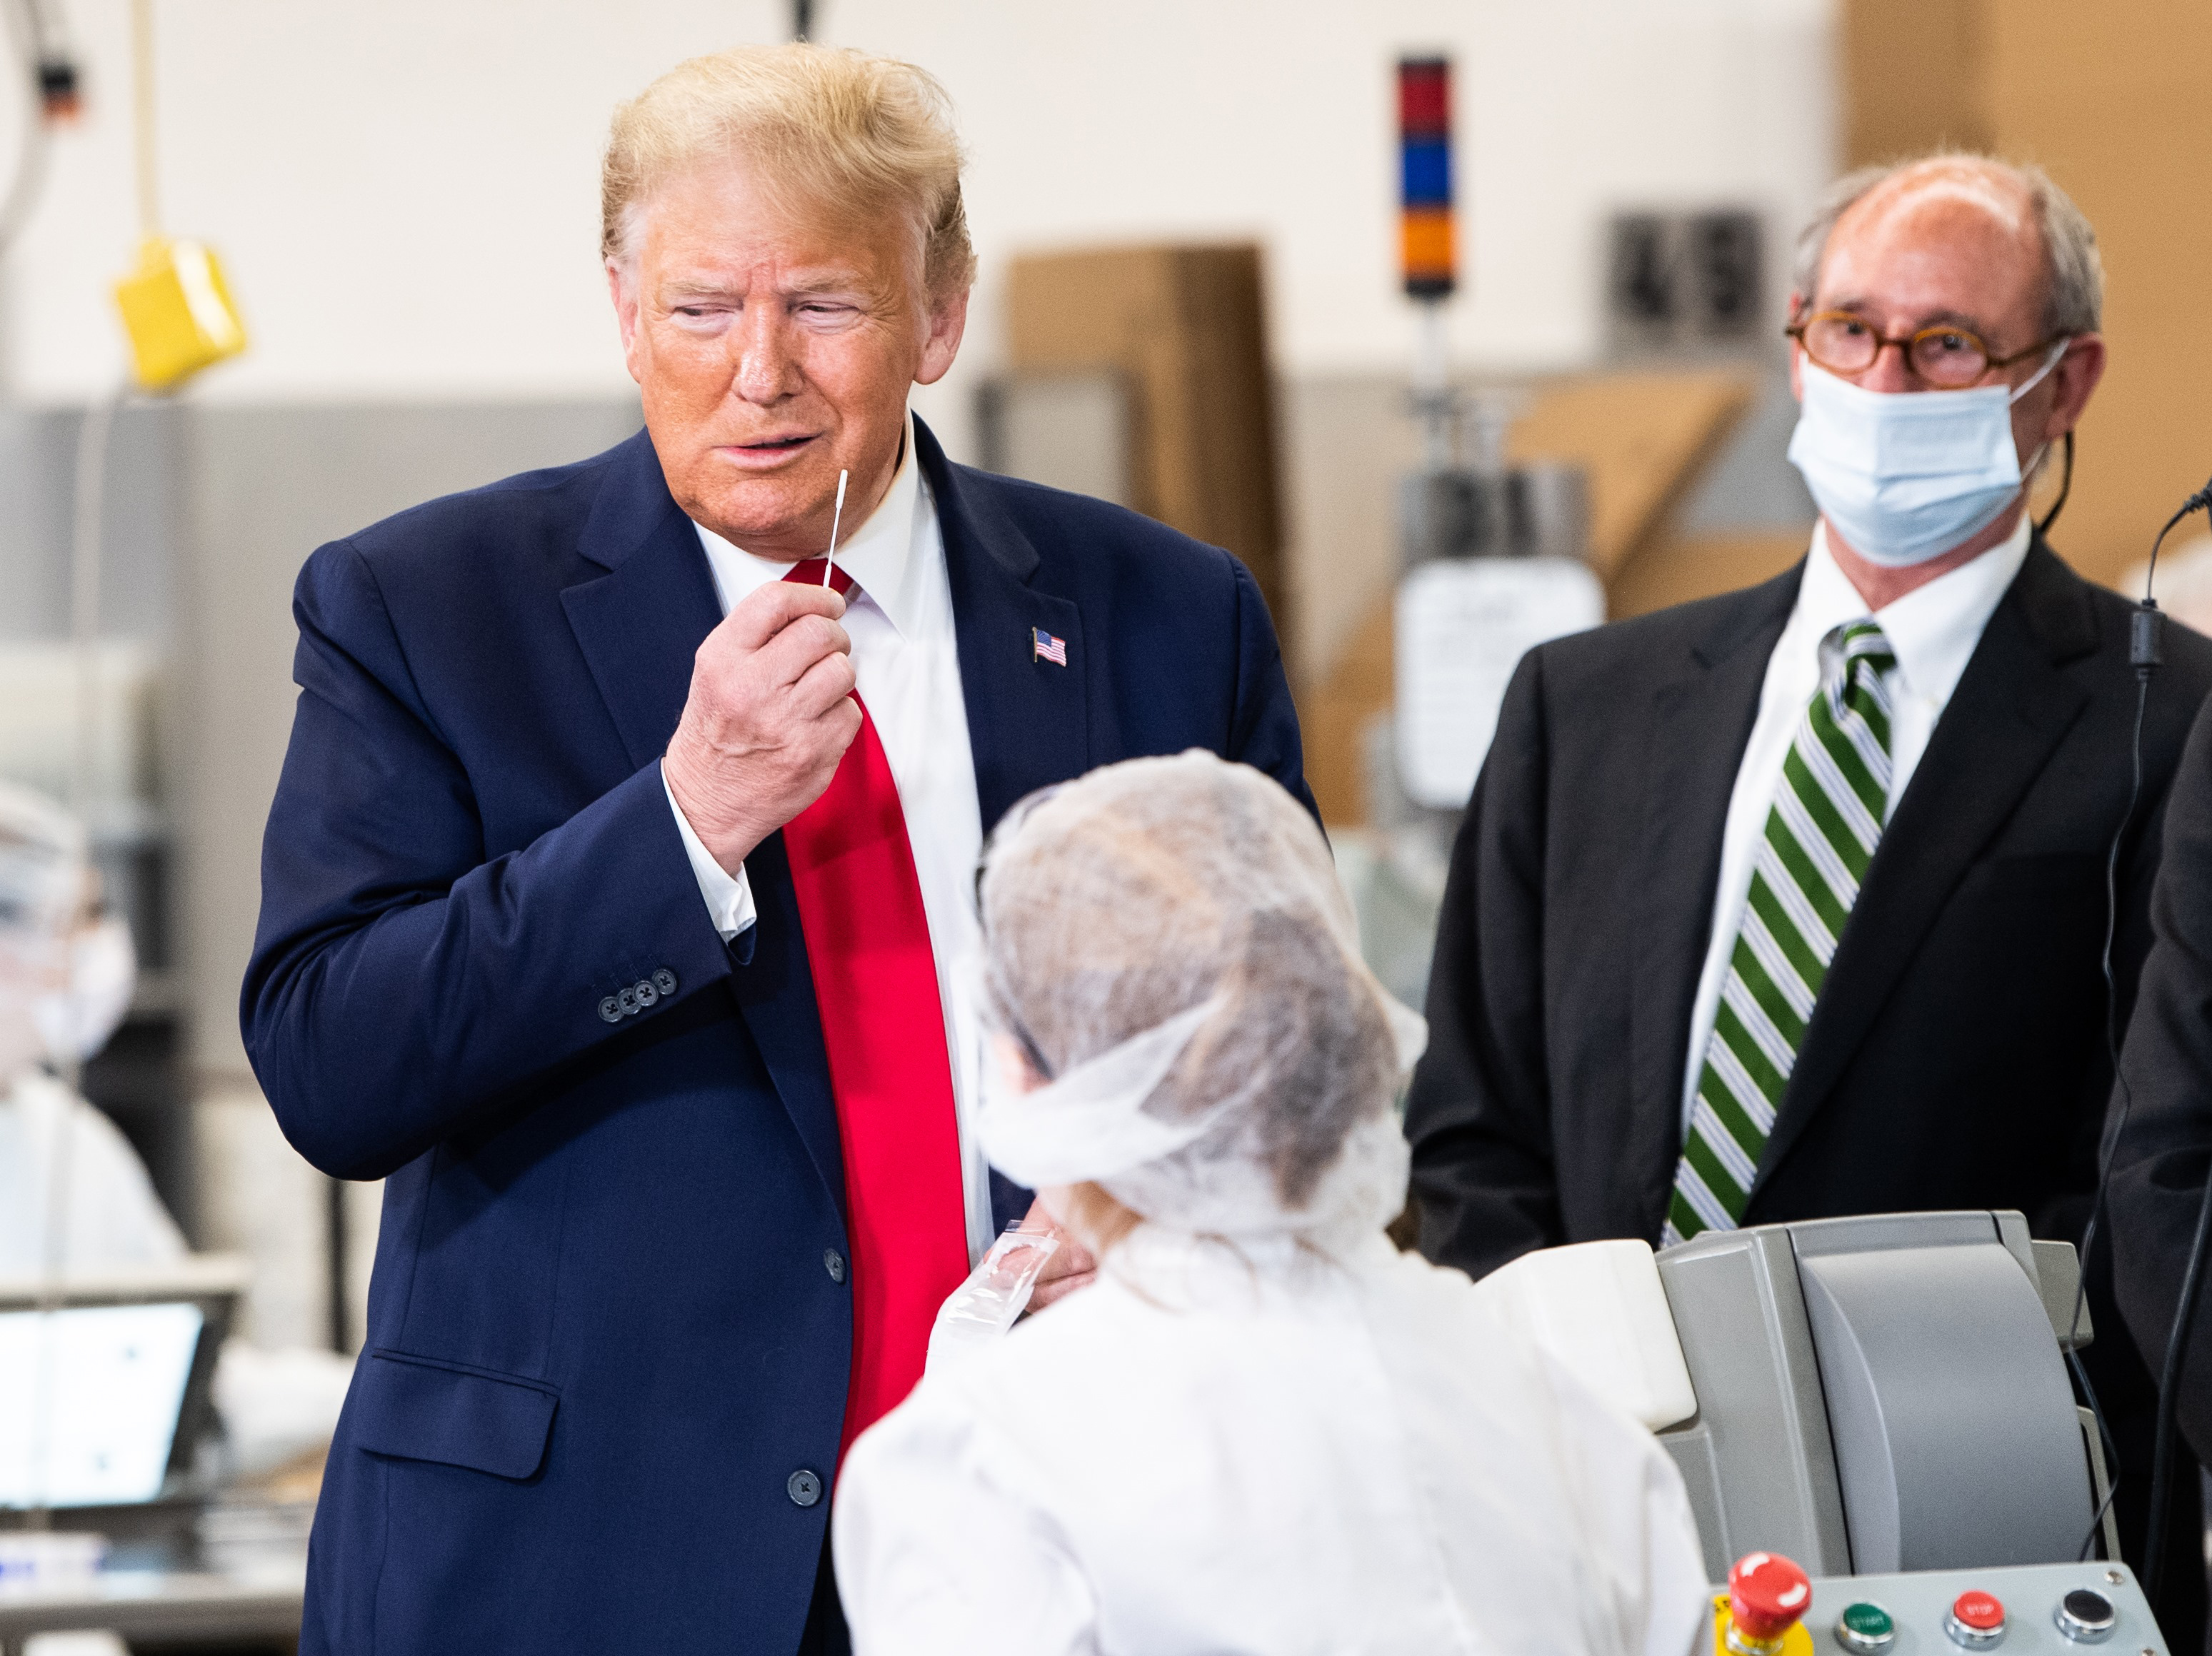 Trump Tours And Speaks At Puritan Medical Products Manufacturing Company